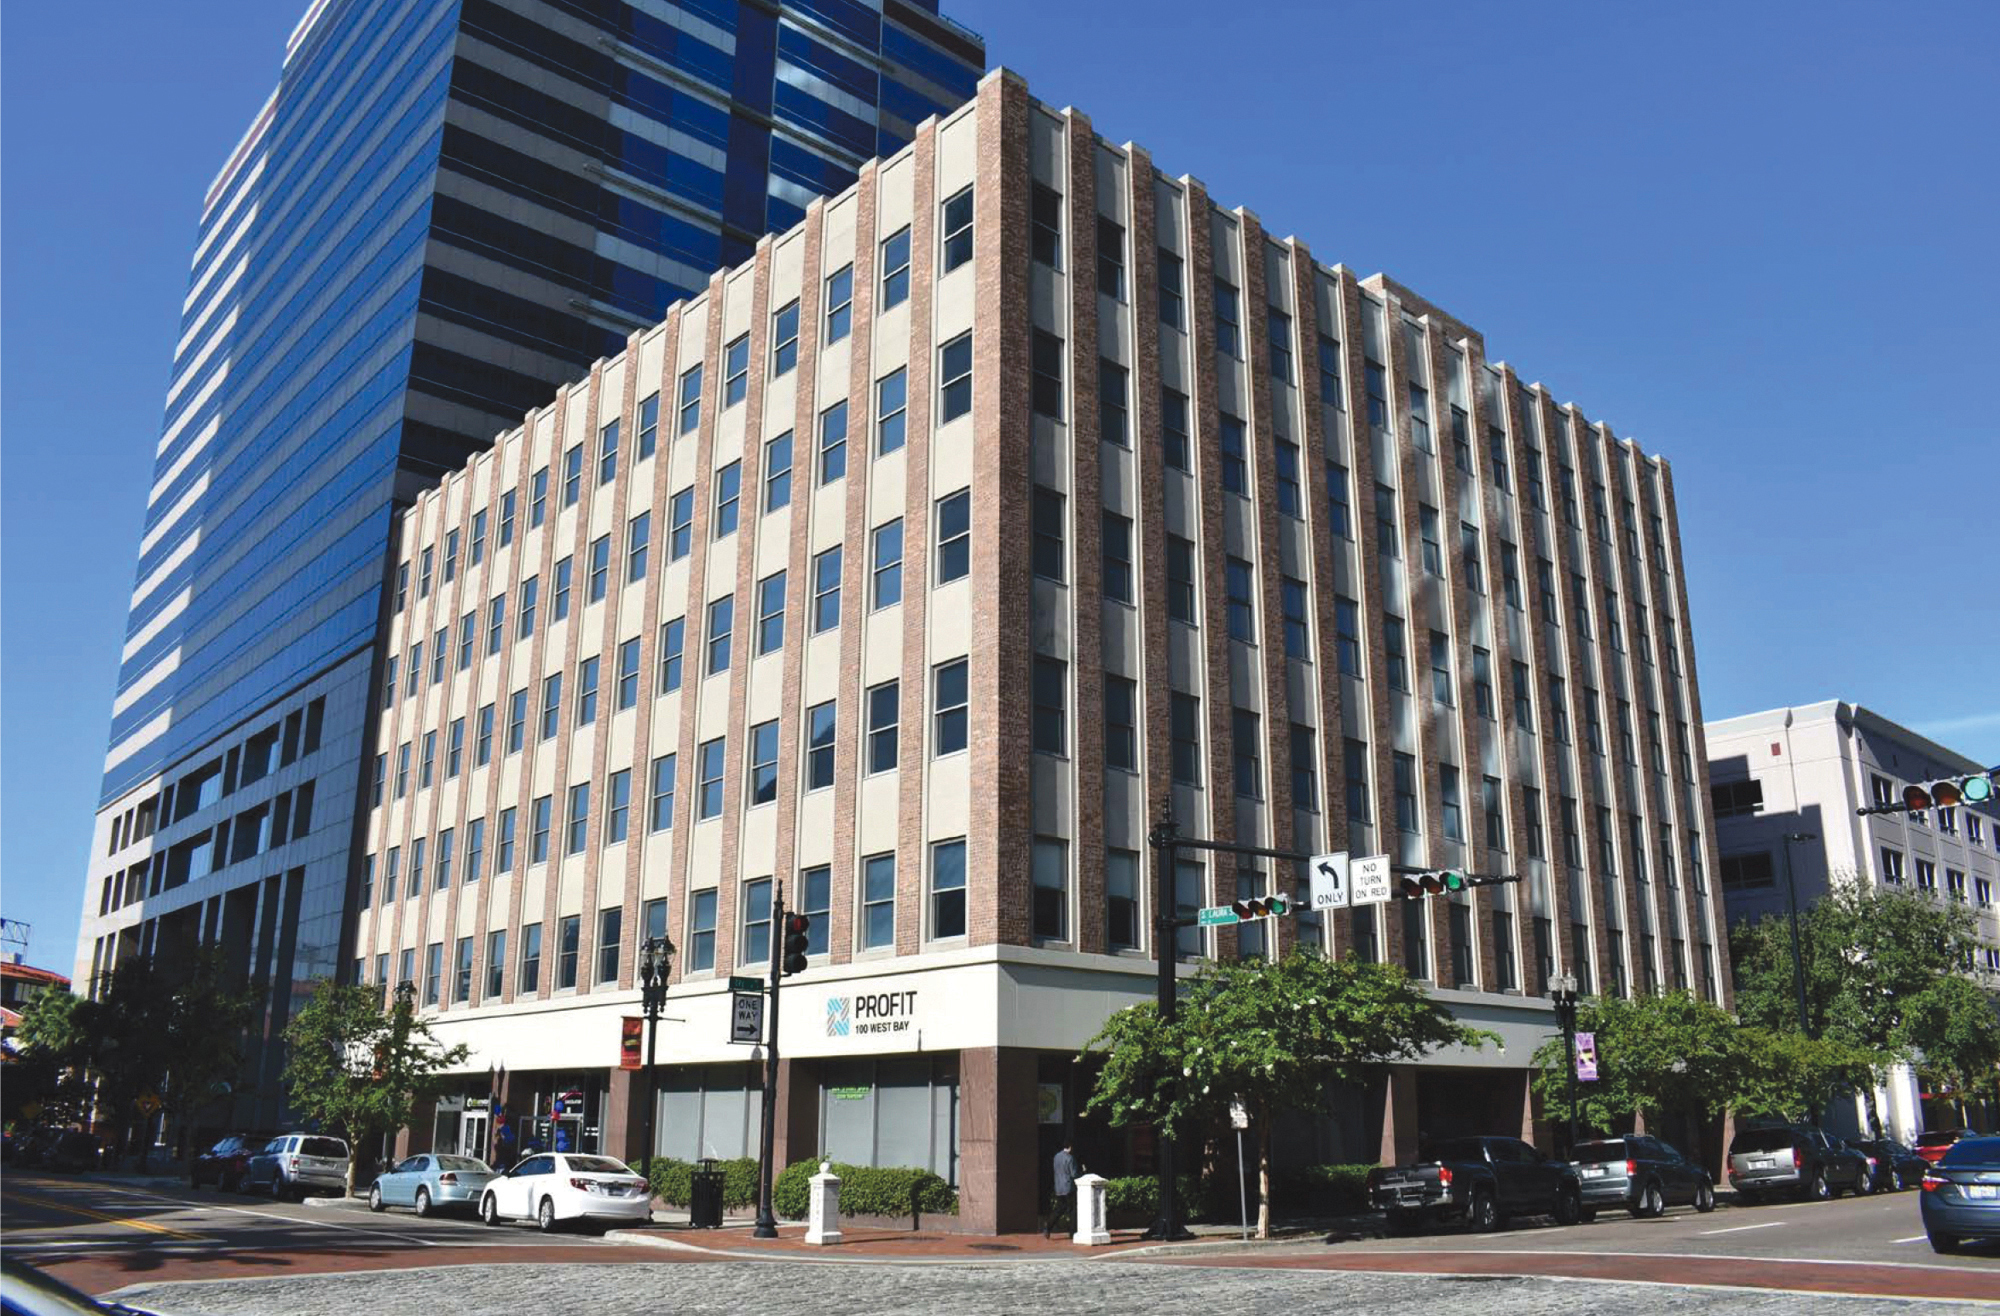 VyStar Credit Union bought the former Life of the South Building in March and plans to make $15.3 million in renovations to the 10-story building.